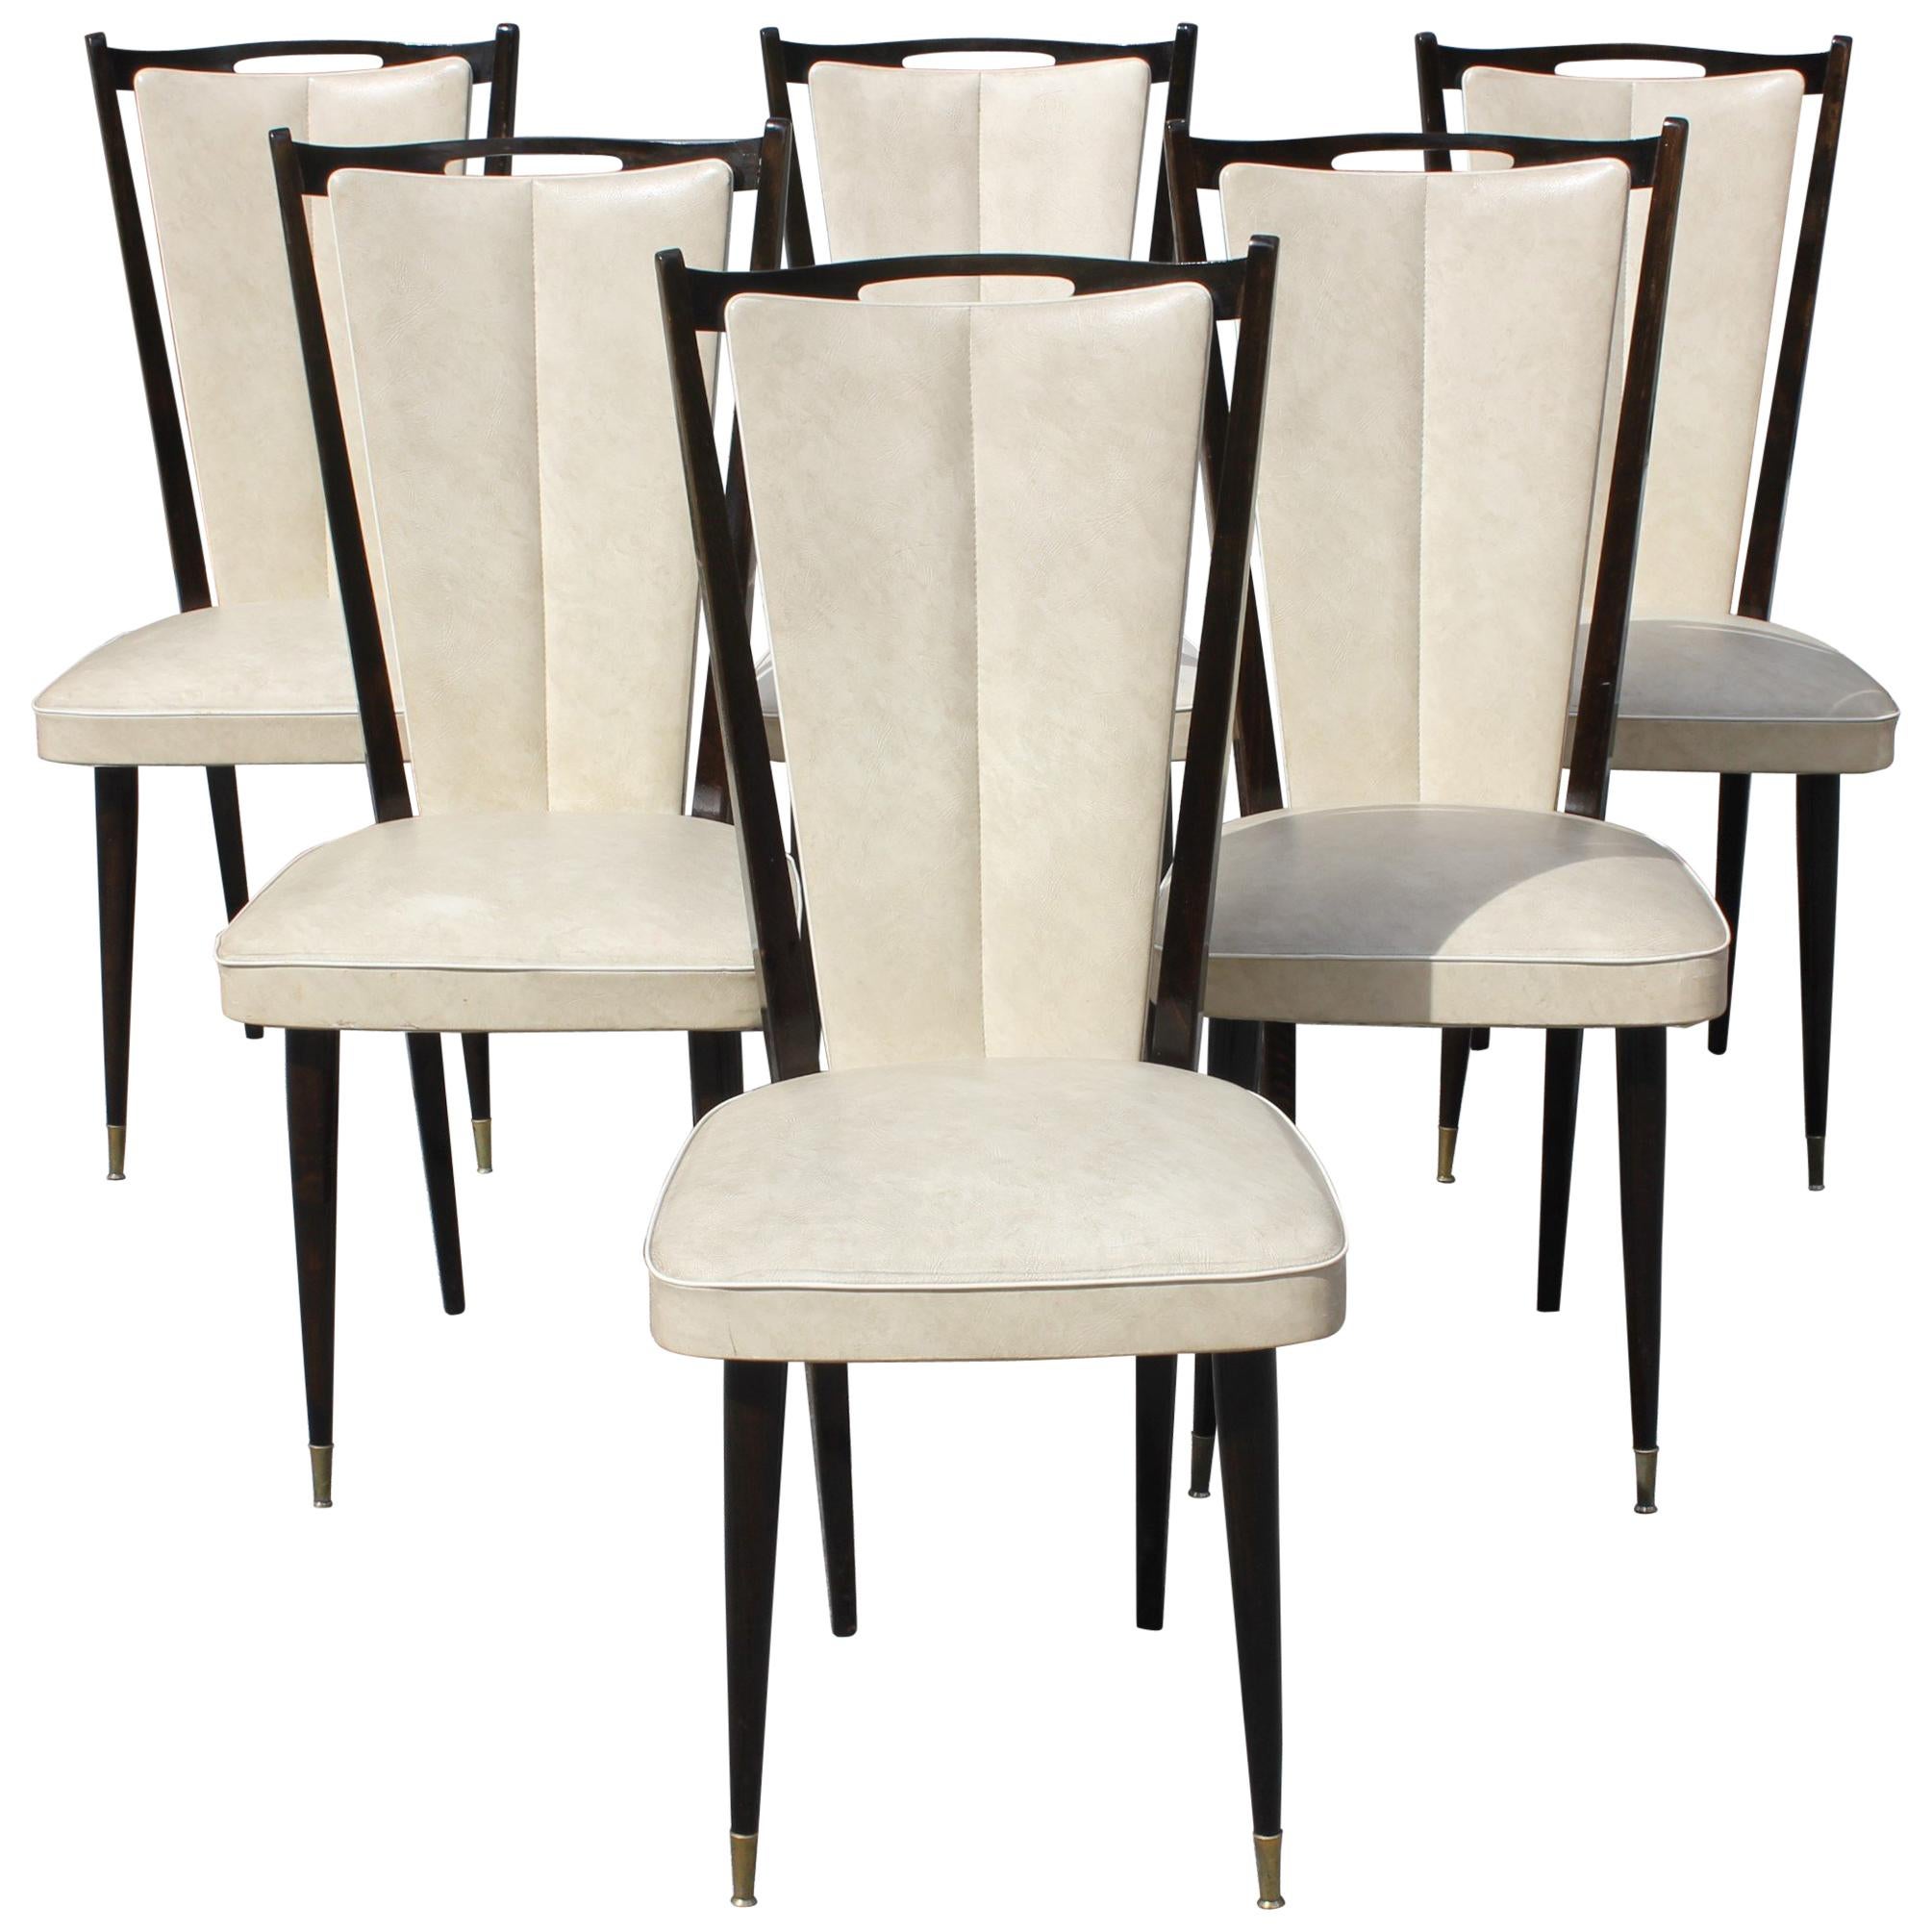 Beautiful Set of Six French Art Deco Solid Mahogany Dining Chairs, circa 1940s